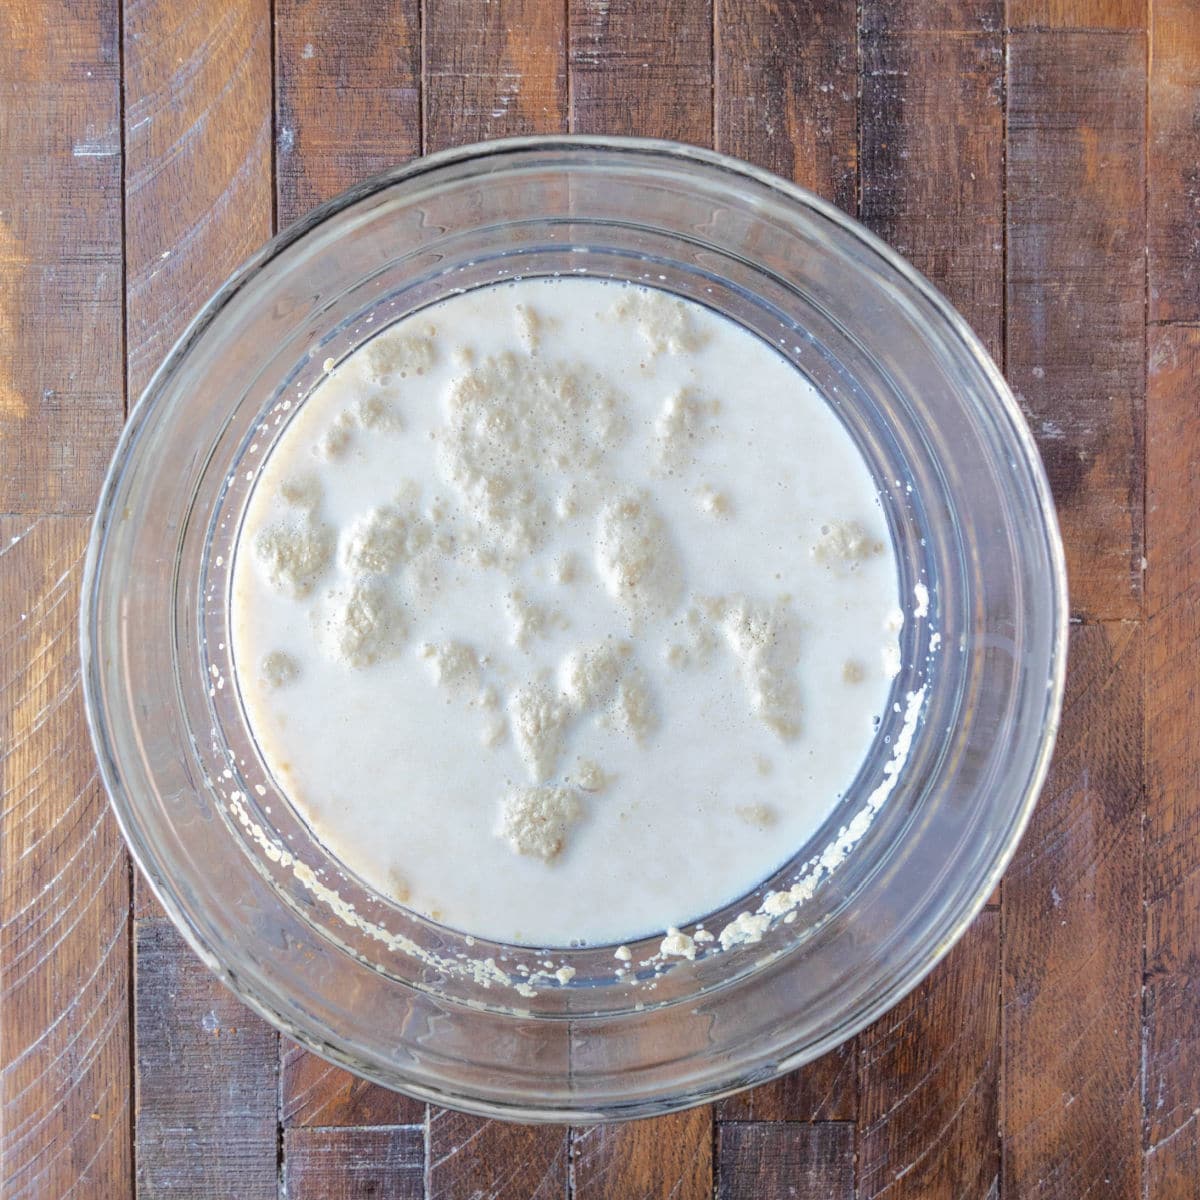 A glass bowl with yeast proofing.